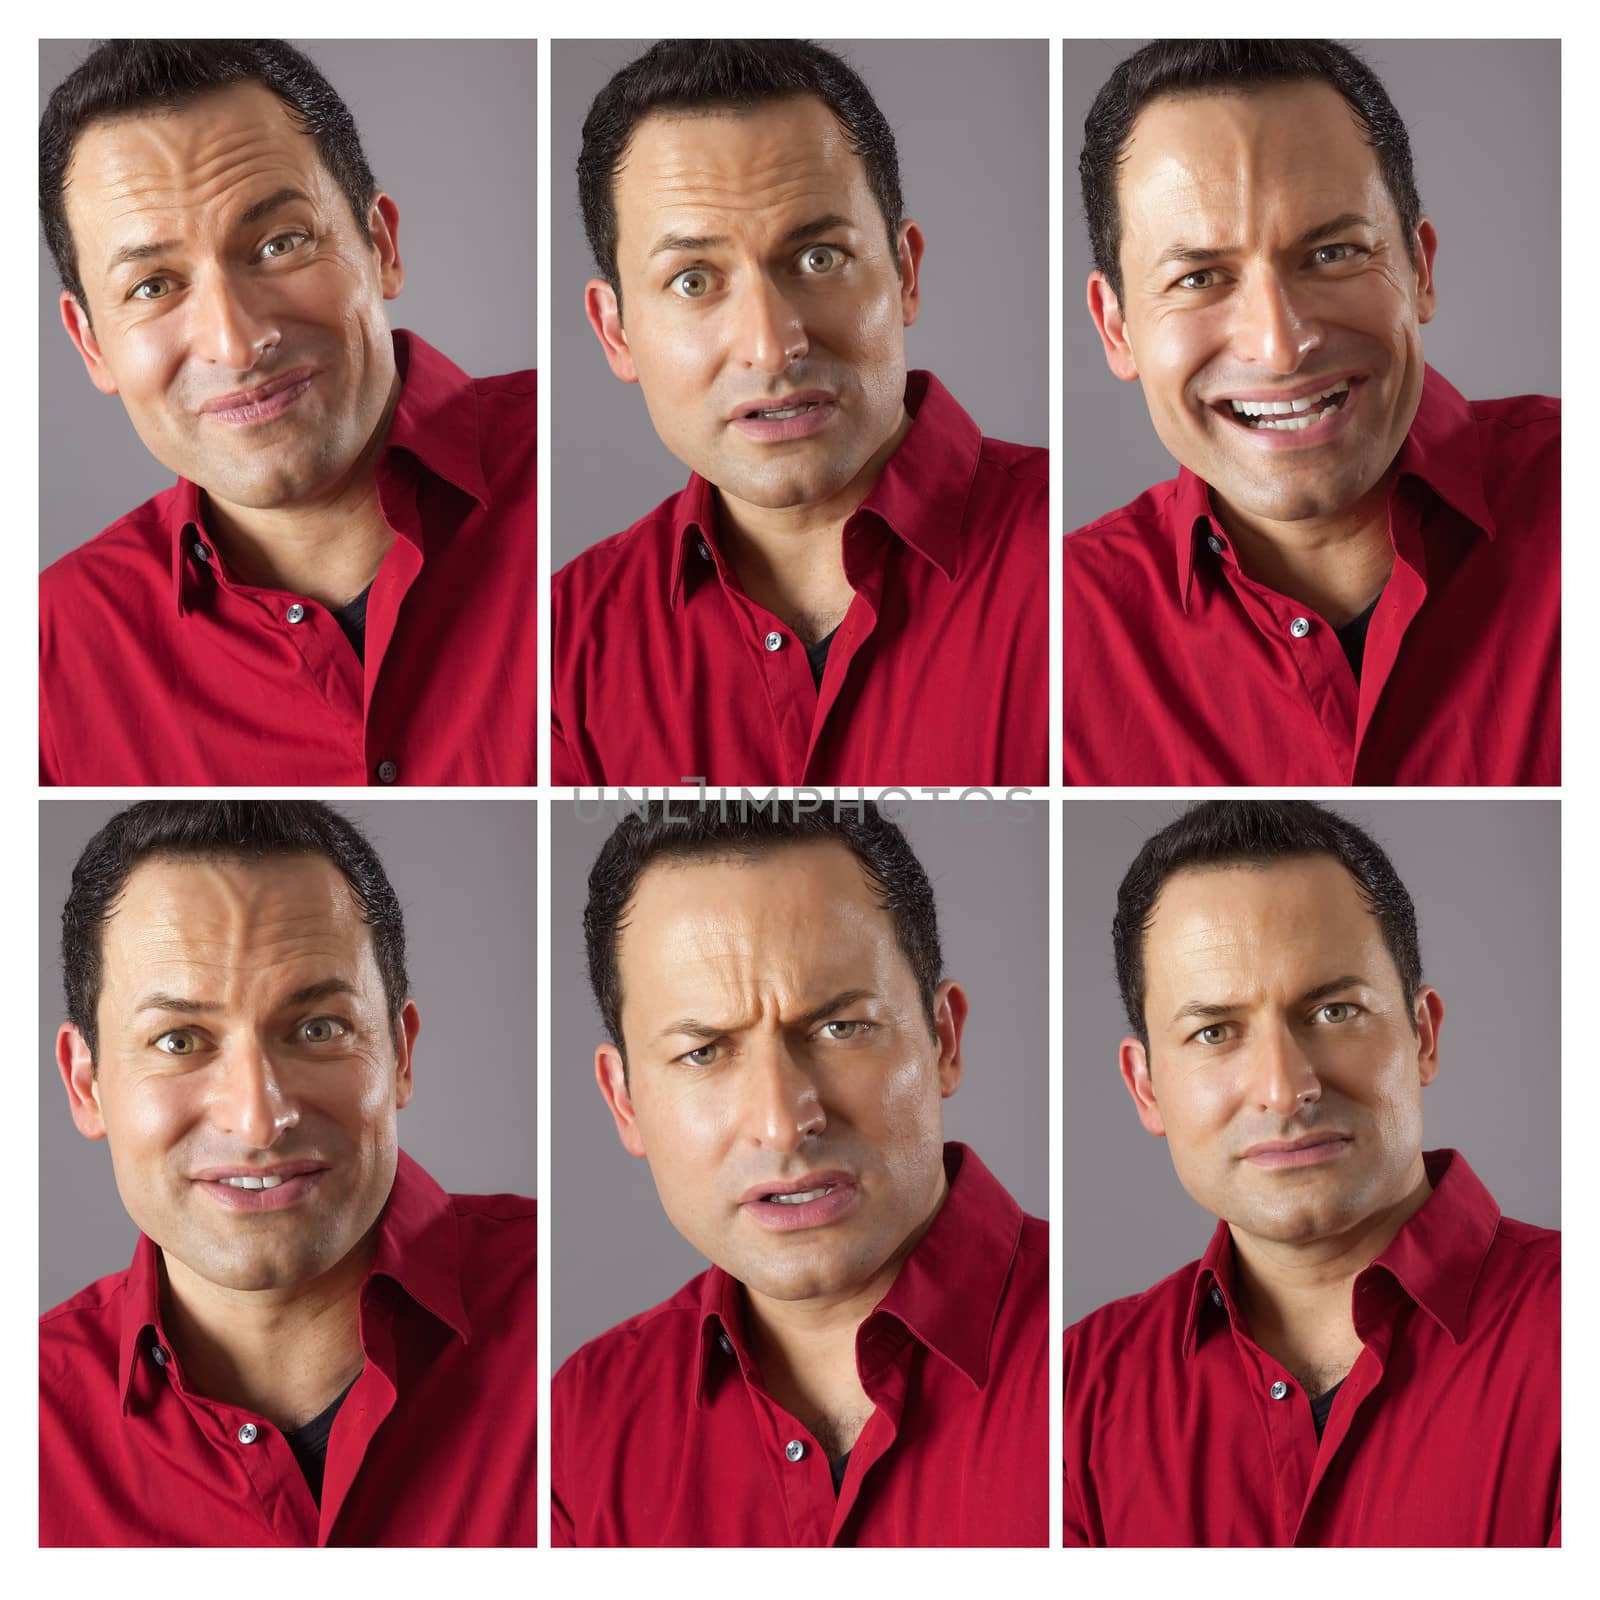 An image of six different male expression